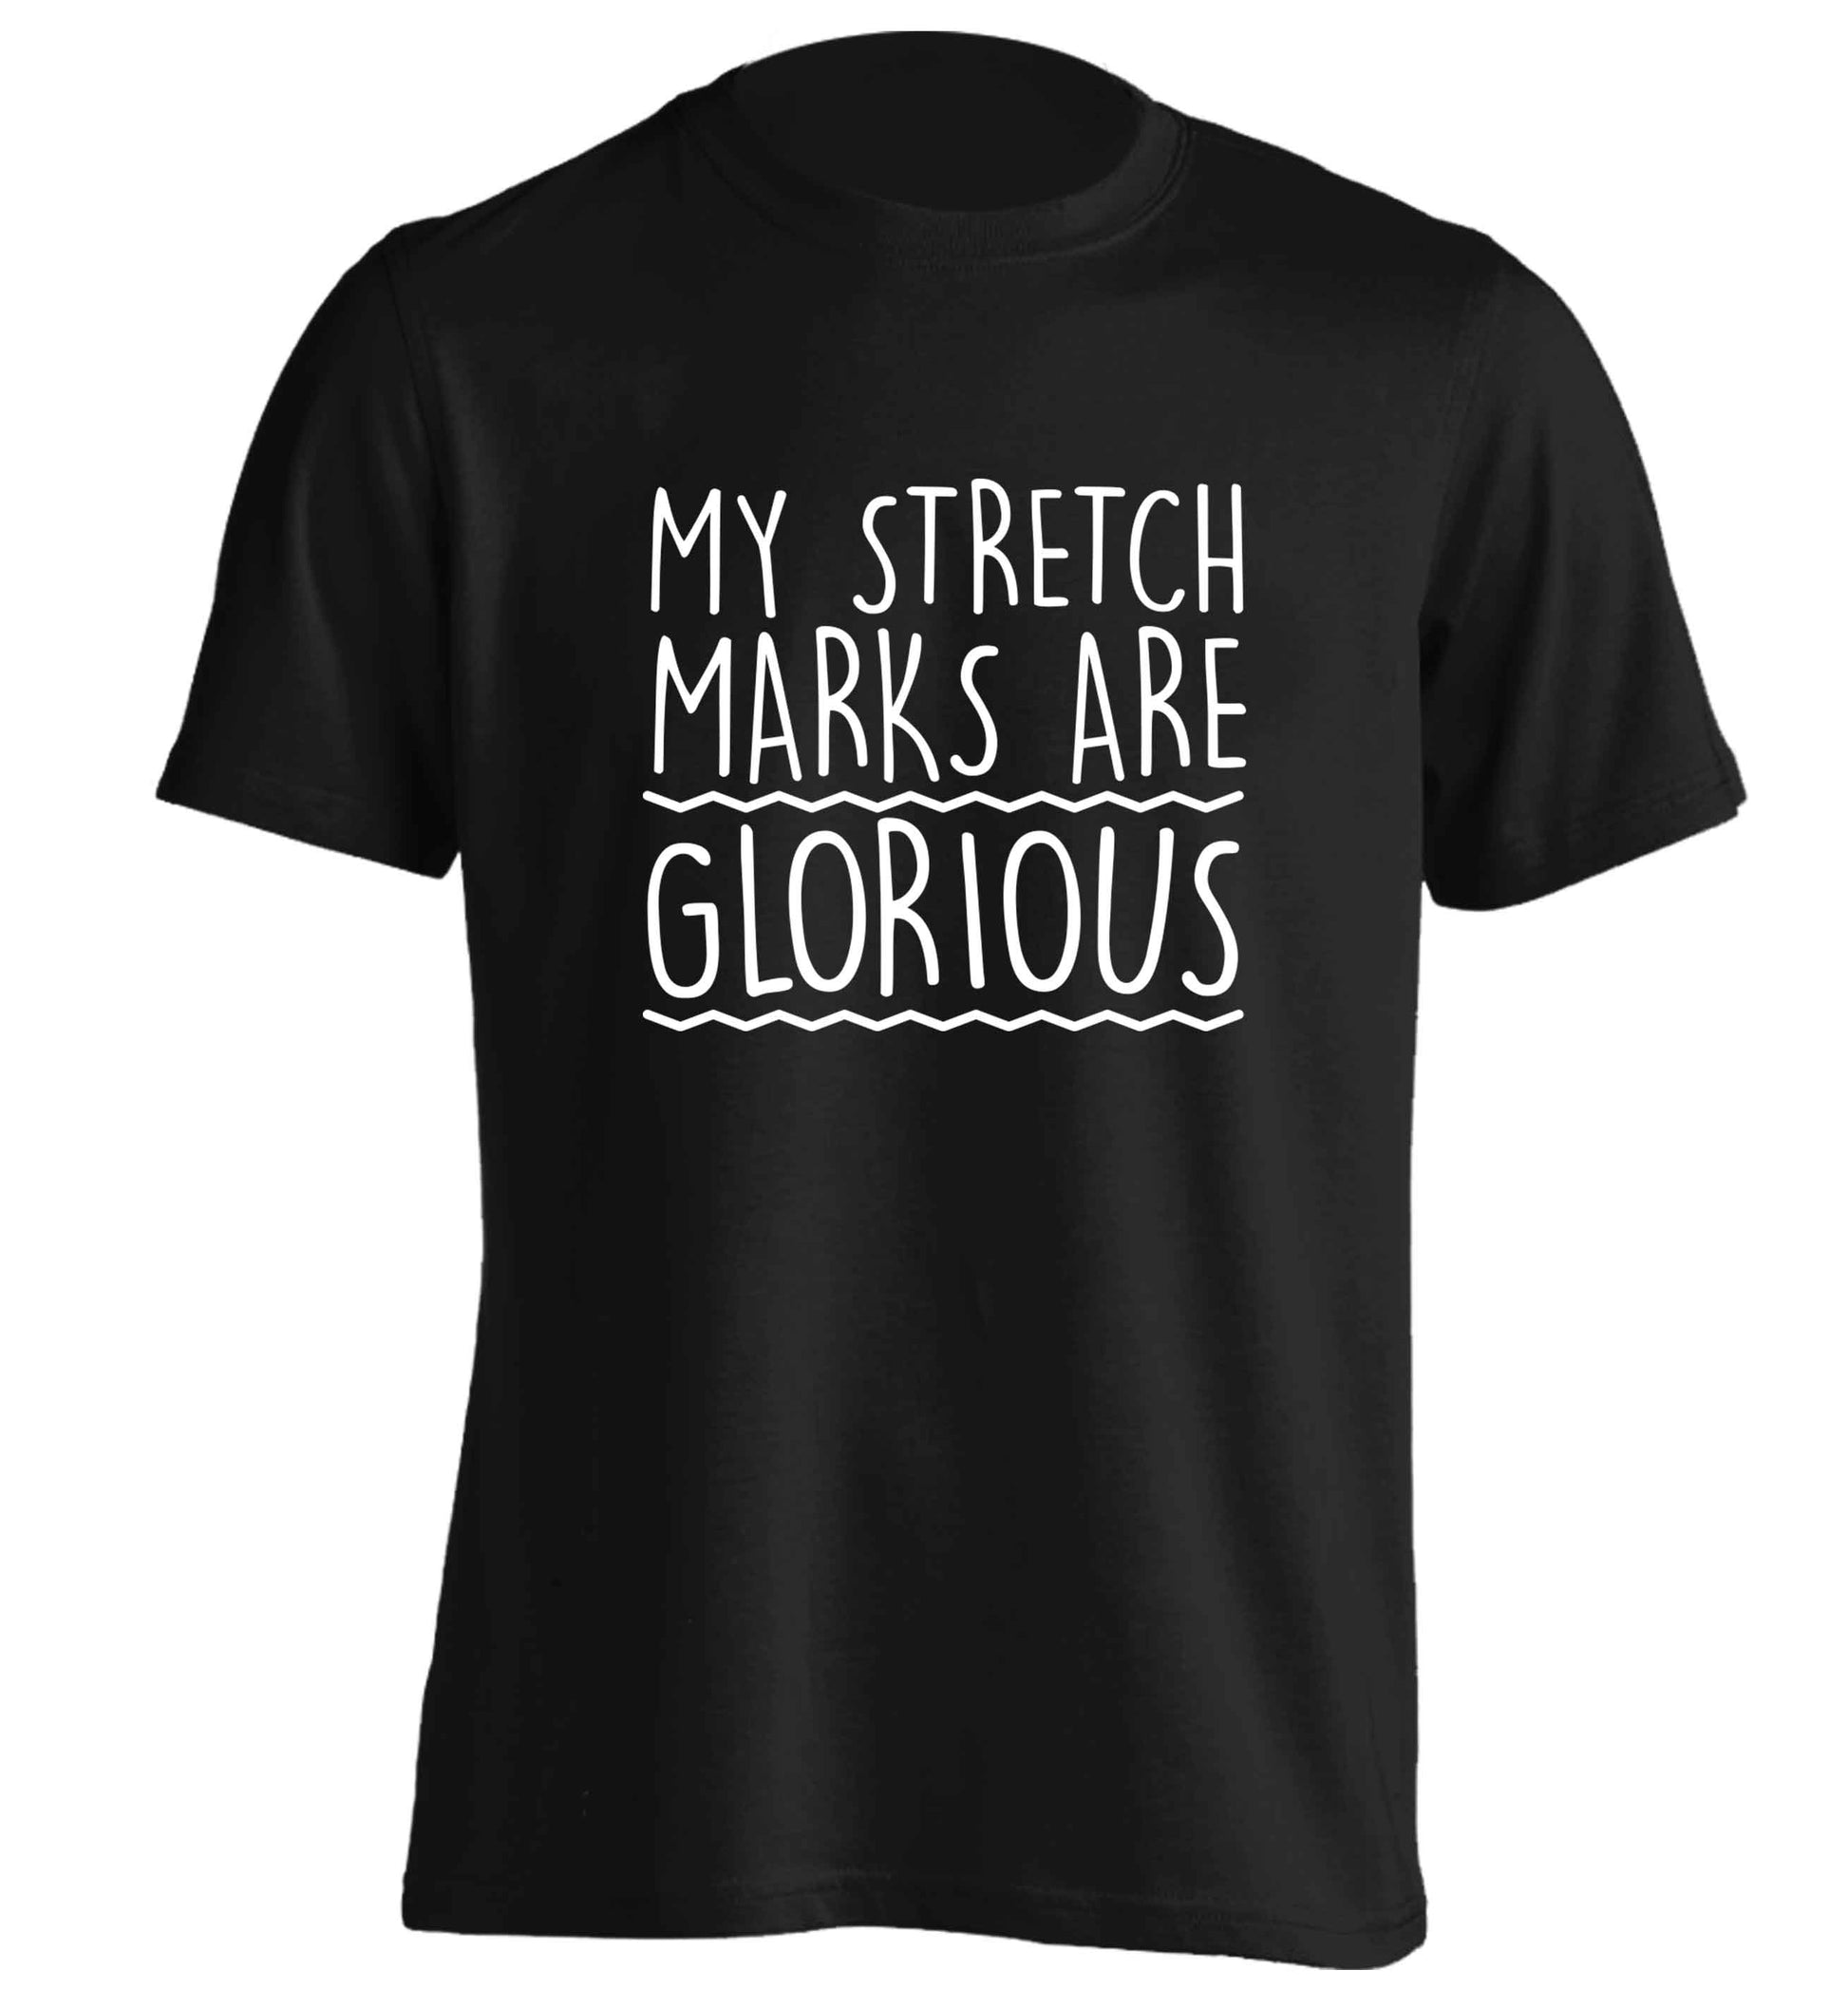 My stretch marks are glorious adults unisex black Tshirt 2XL